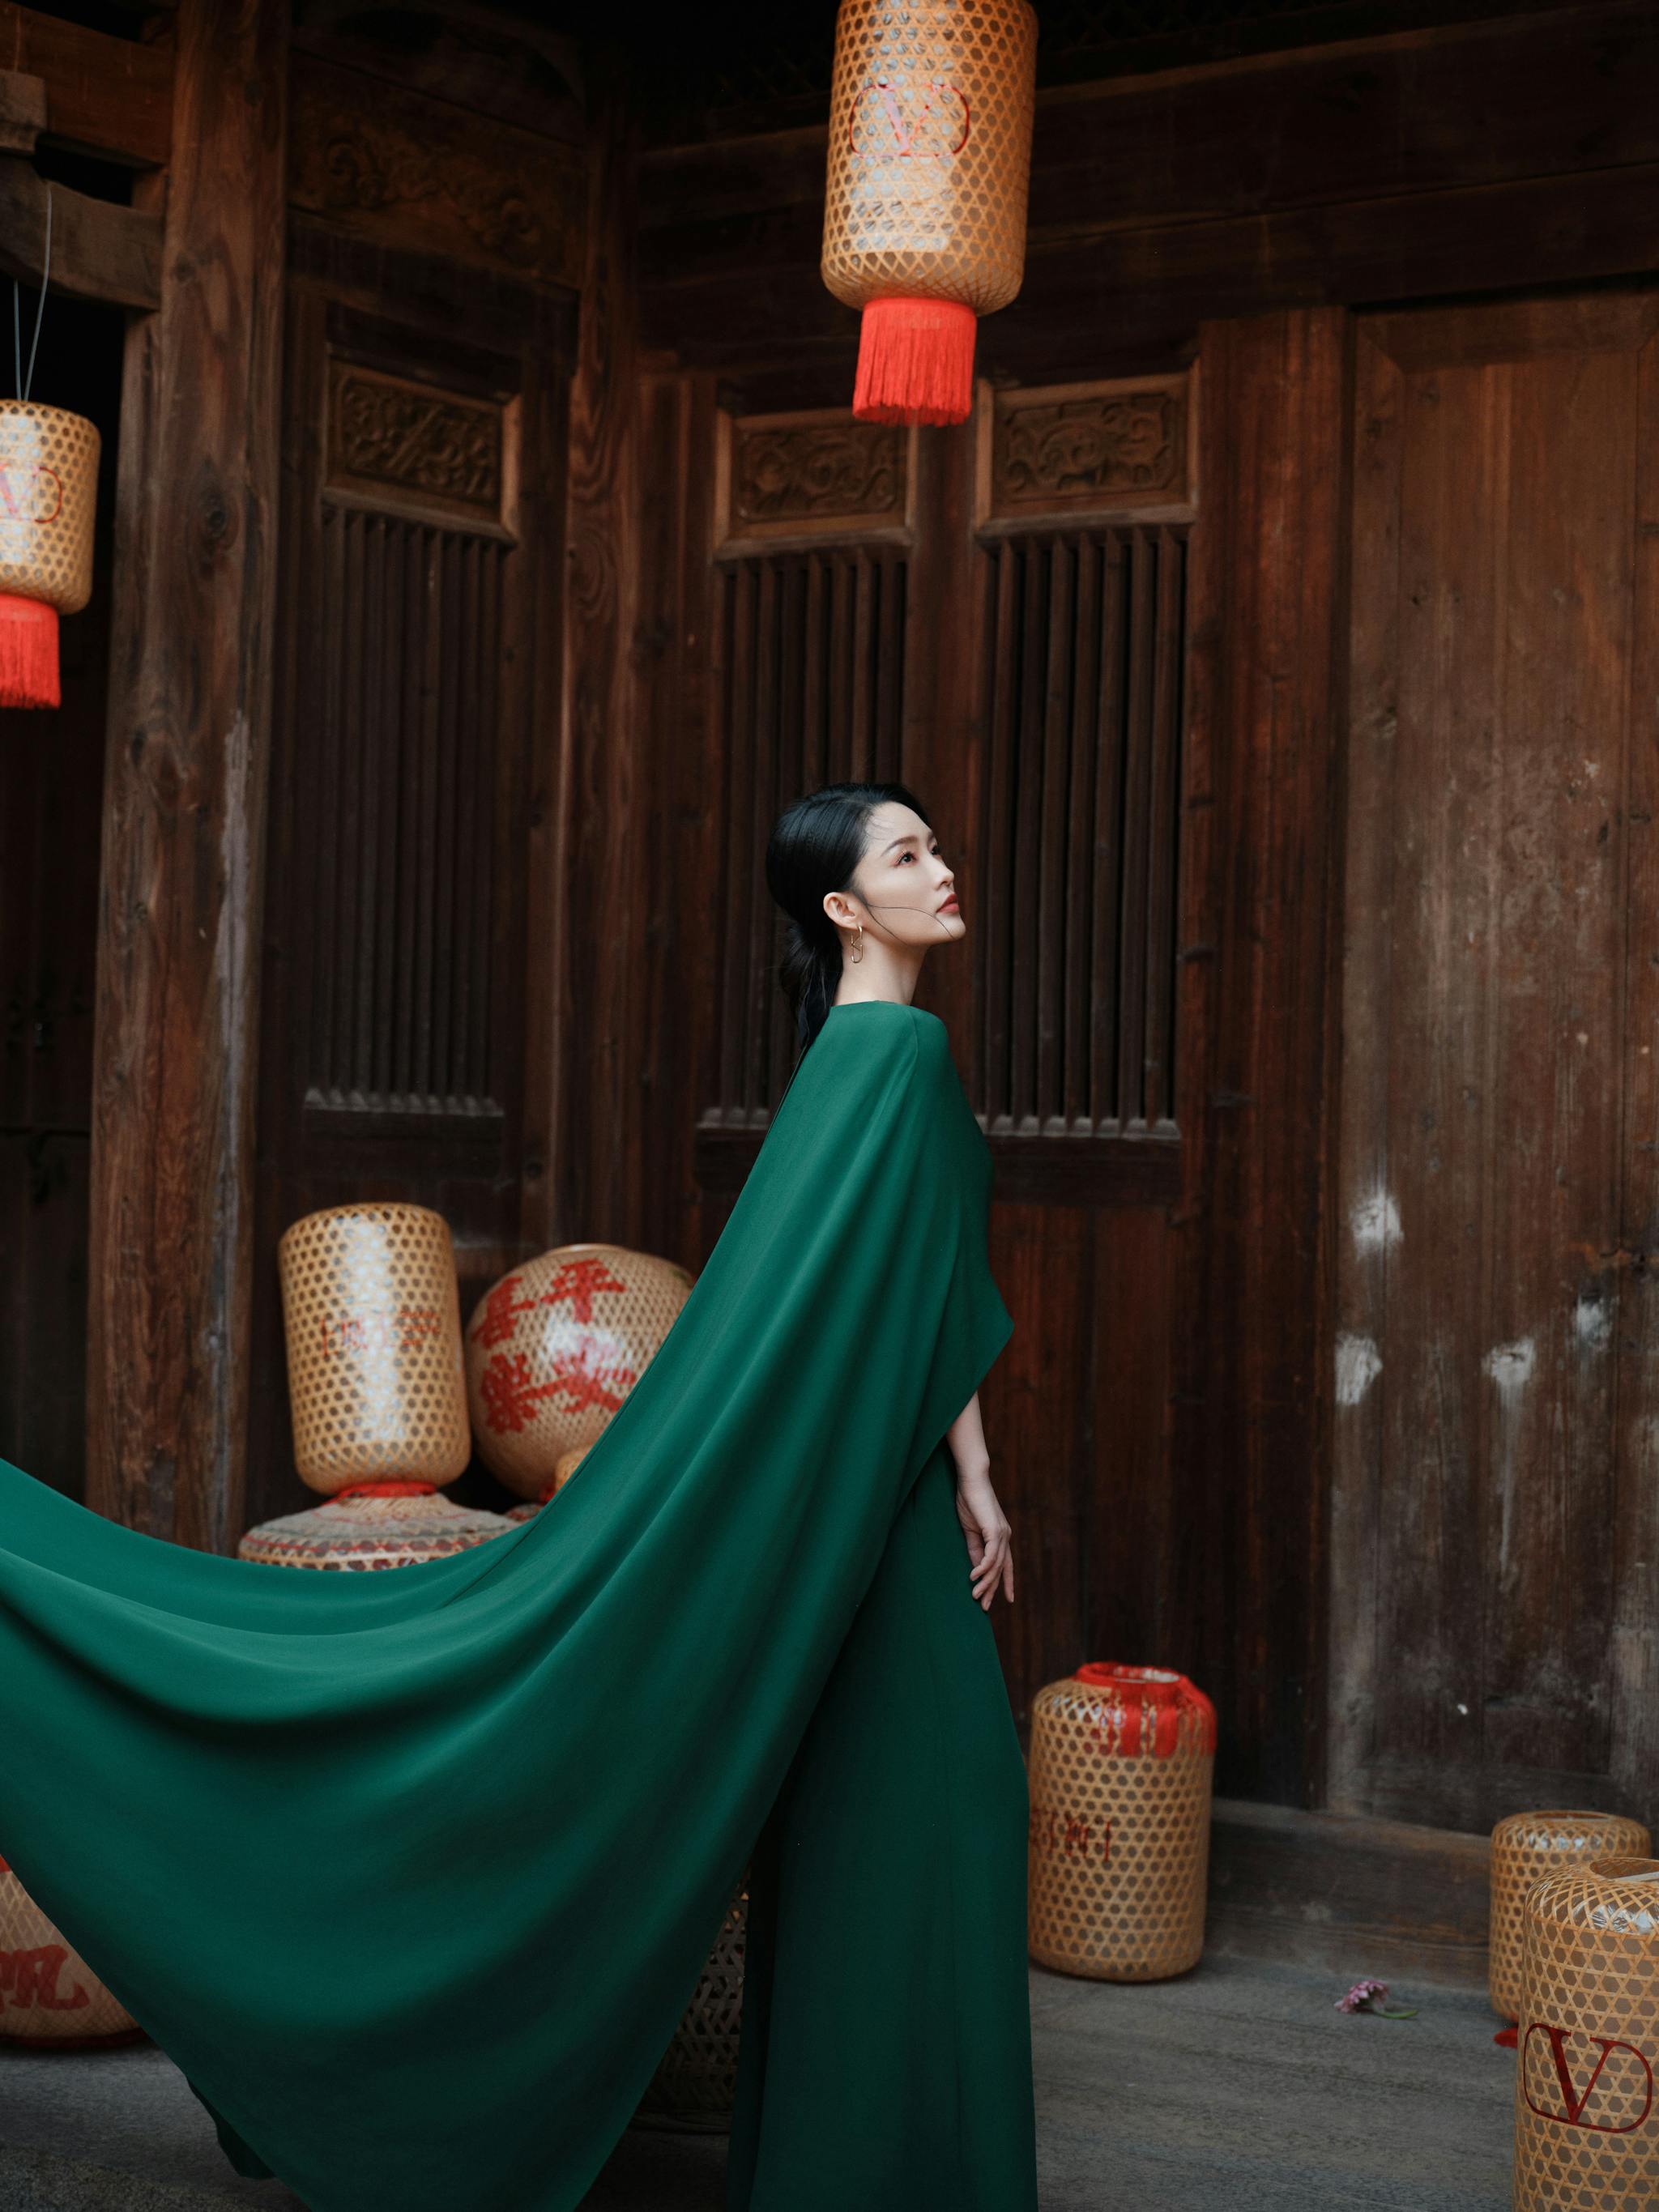 Li Qin's Green Gown Stirs Debate: Modernity vs. Tradition in Chinese Culture